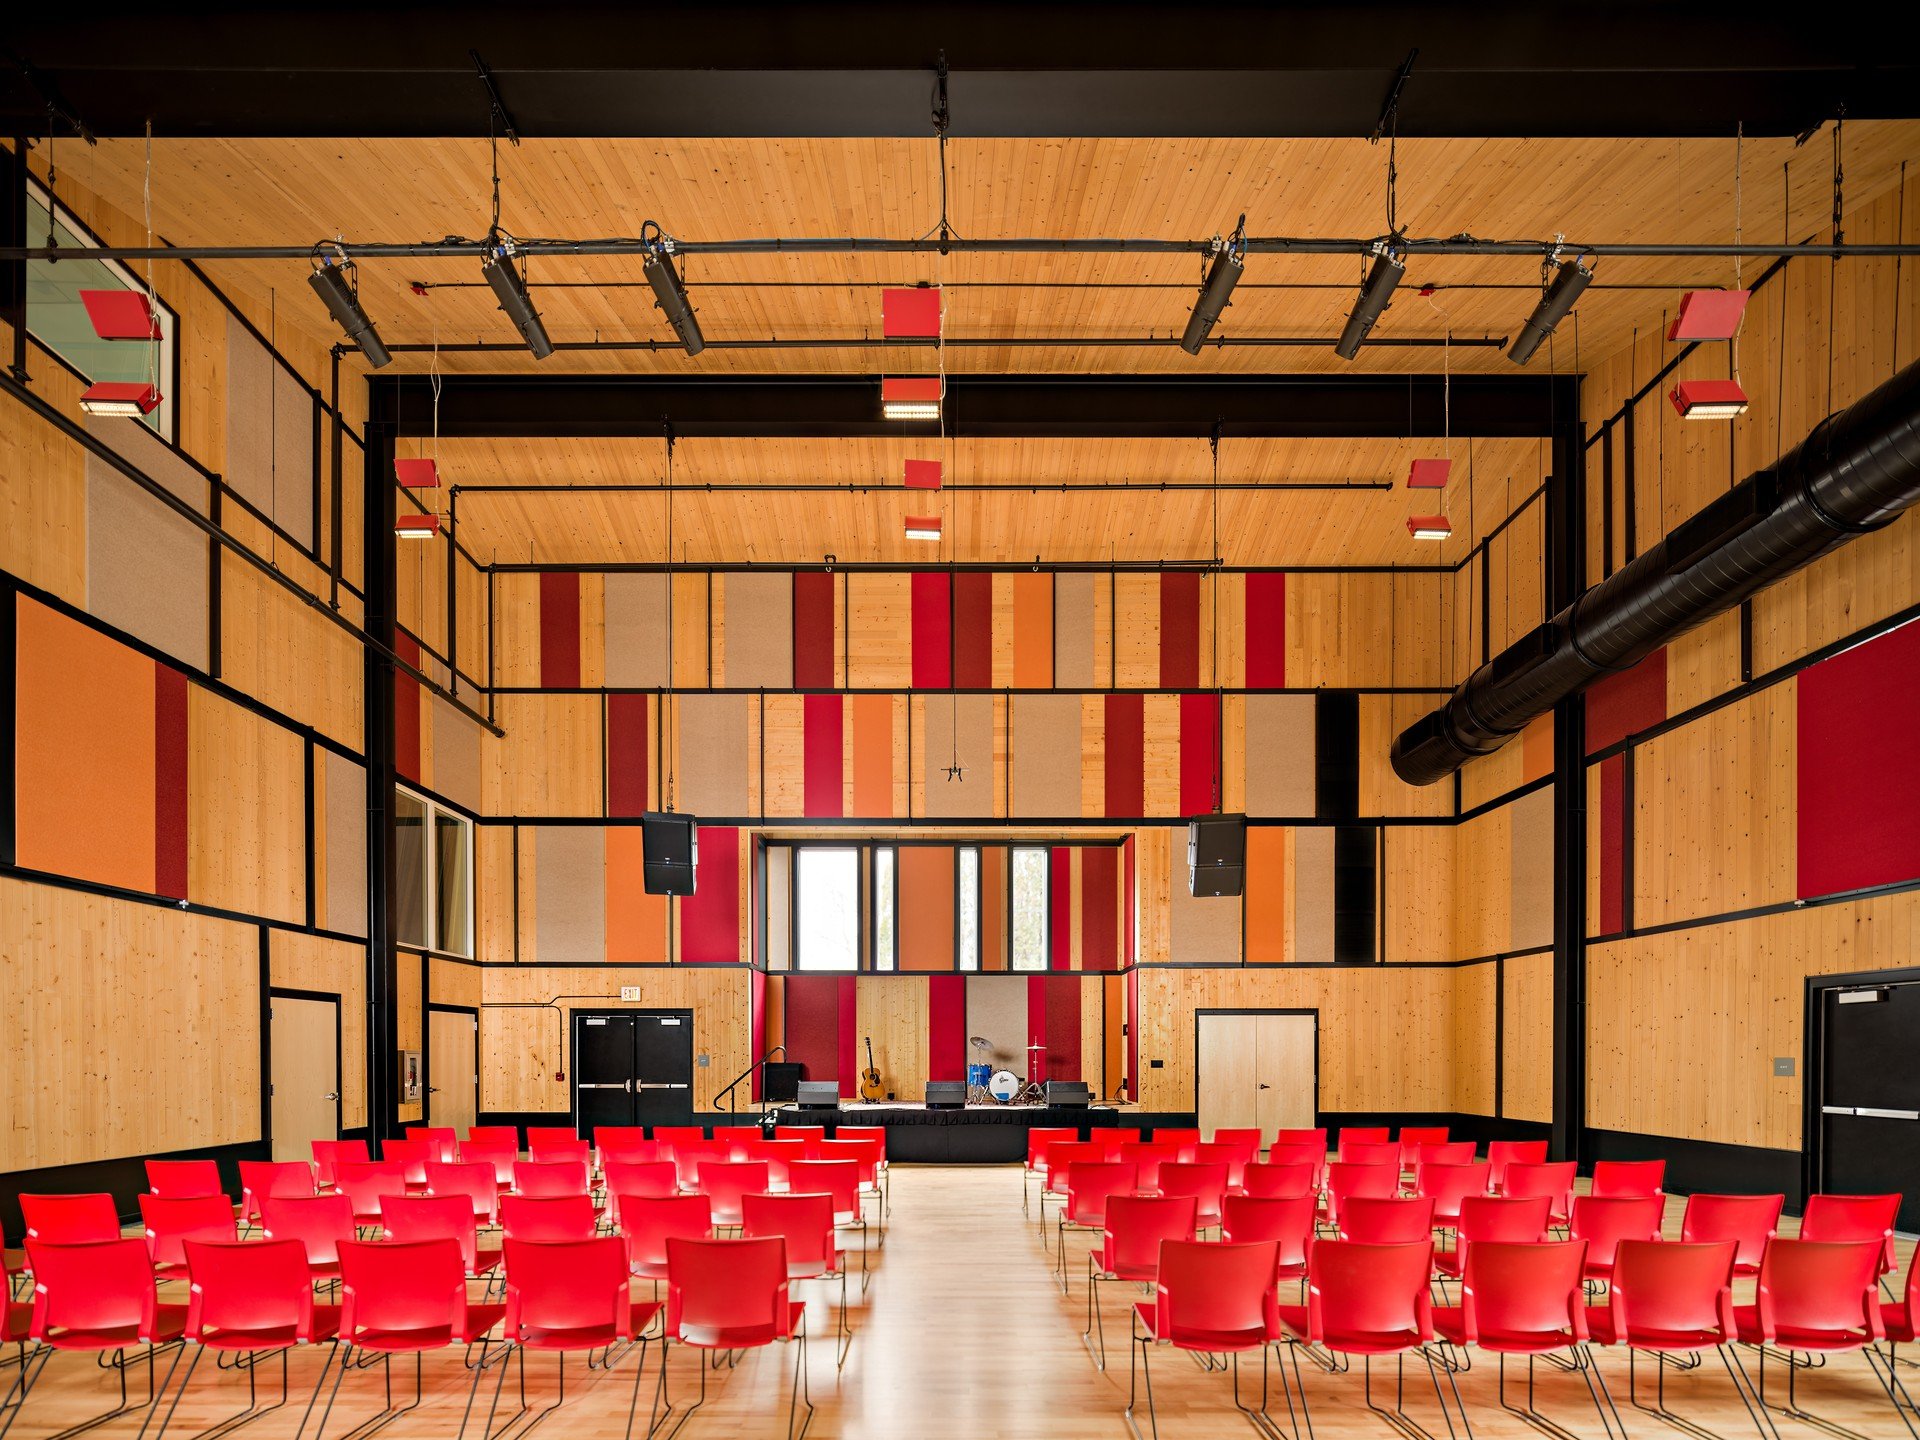 Each year, the Maine chapter of the American Institute of Architects (AIA) celebrates design in its annual awards program. We&rsquo;re proud of our mass timber/CLT project for 317 Main Community Music Center in Yarmouth. 

The voting is open for peop